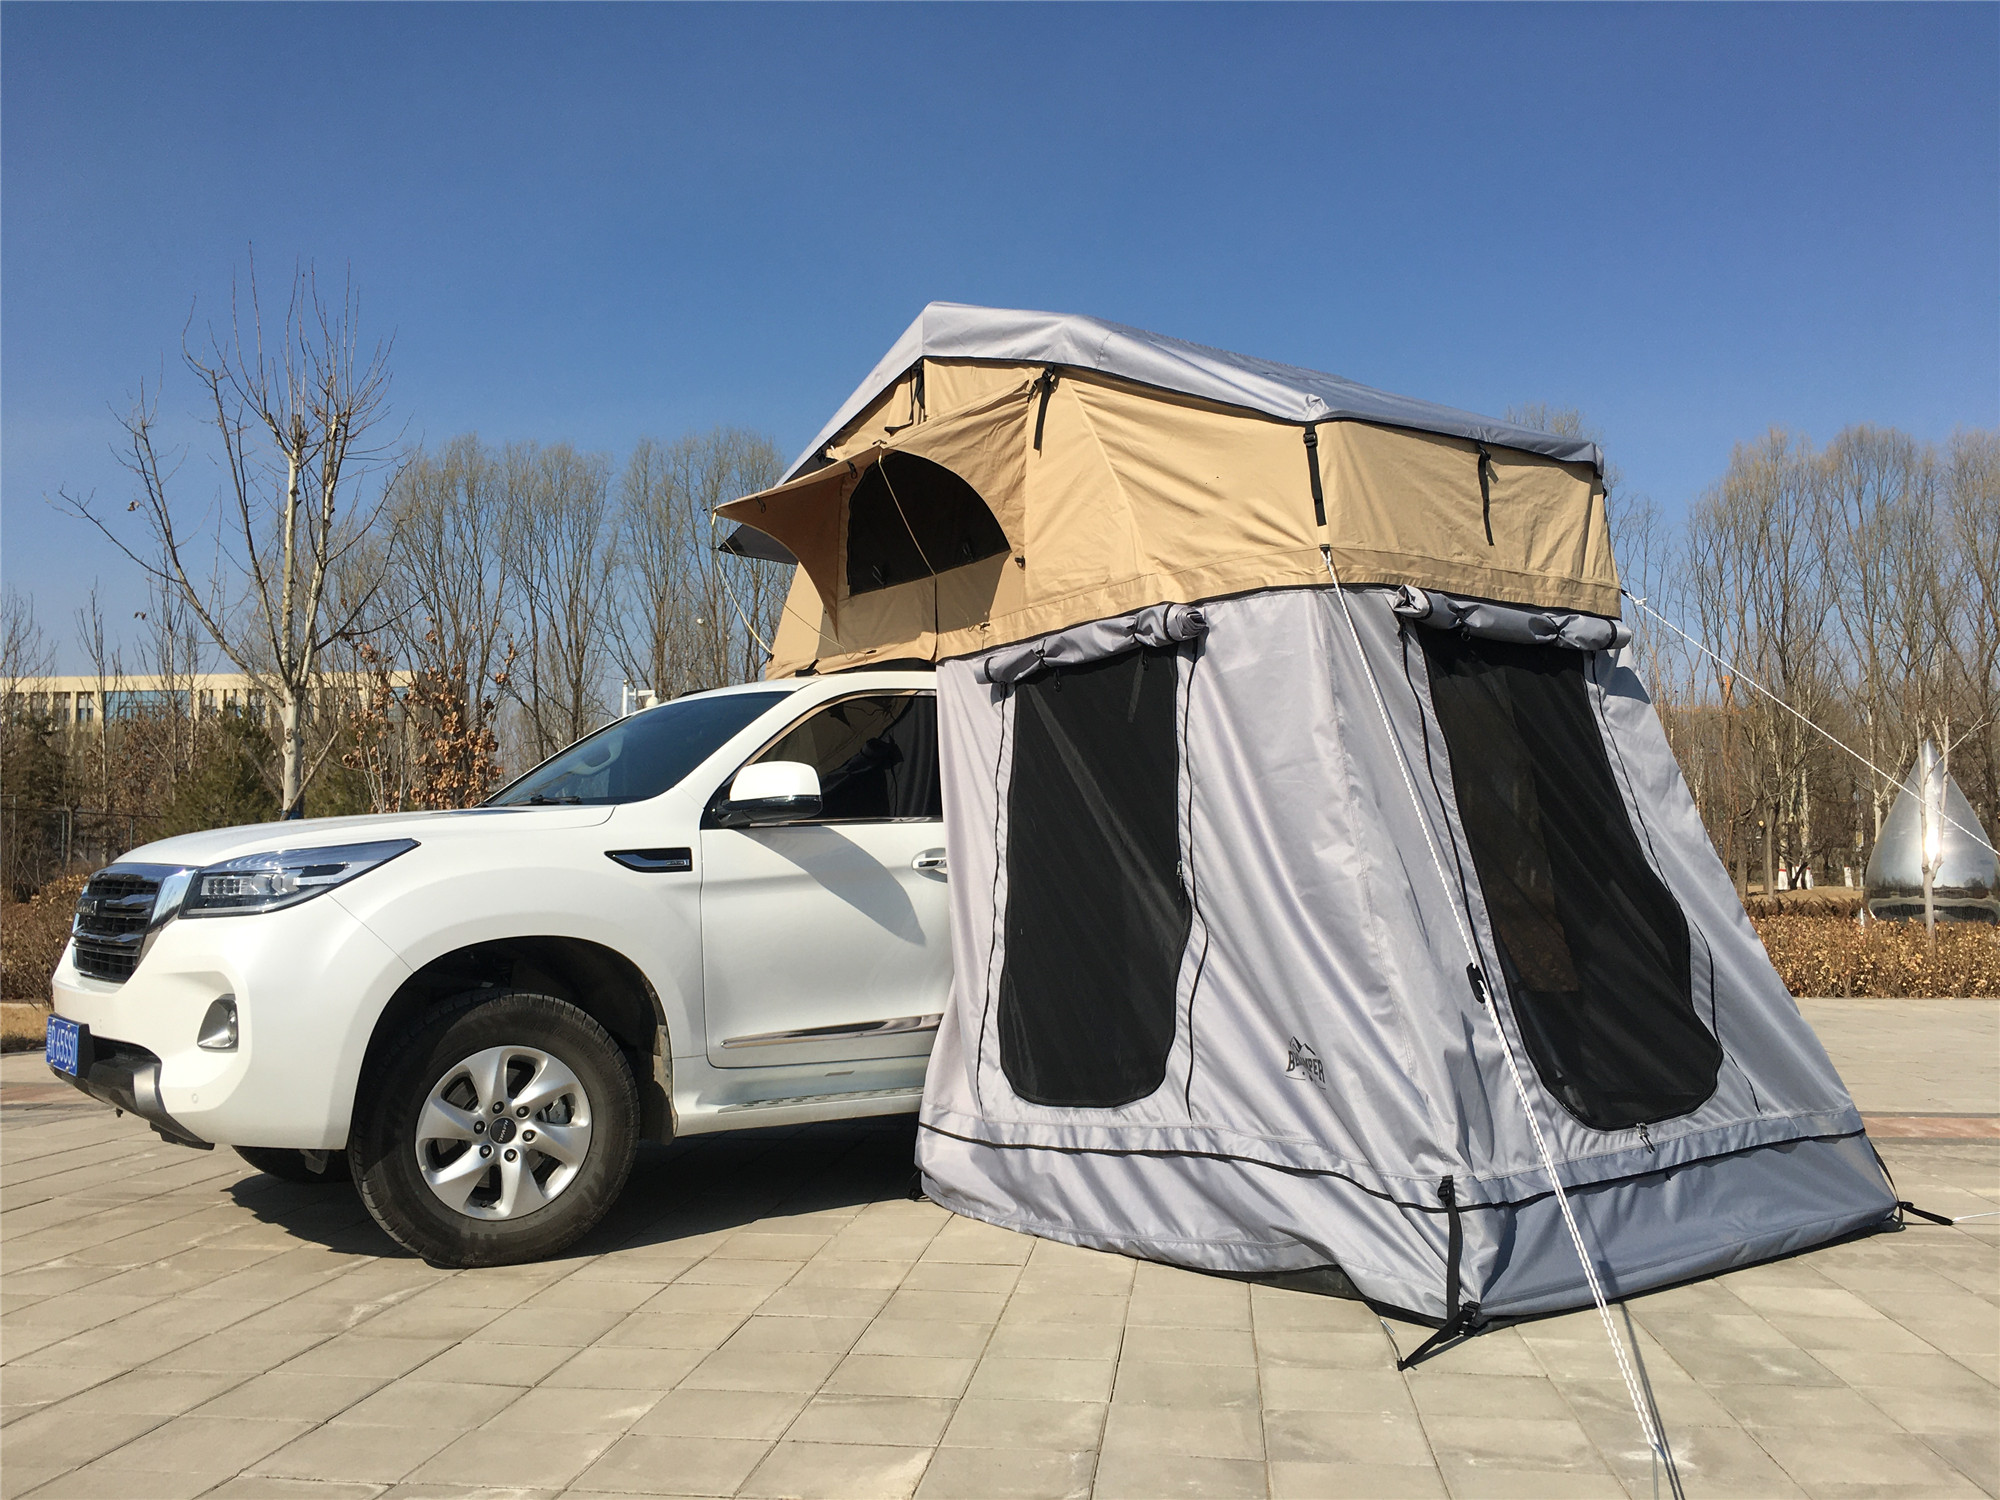 How To Thrive In A Roof Top Tent?